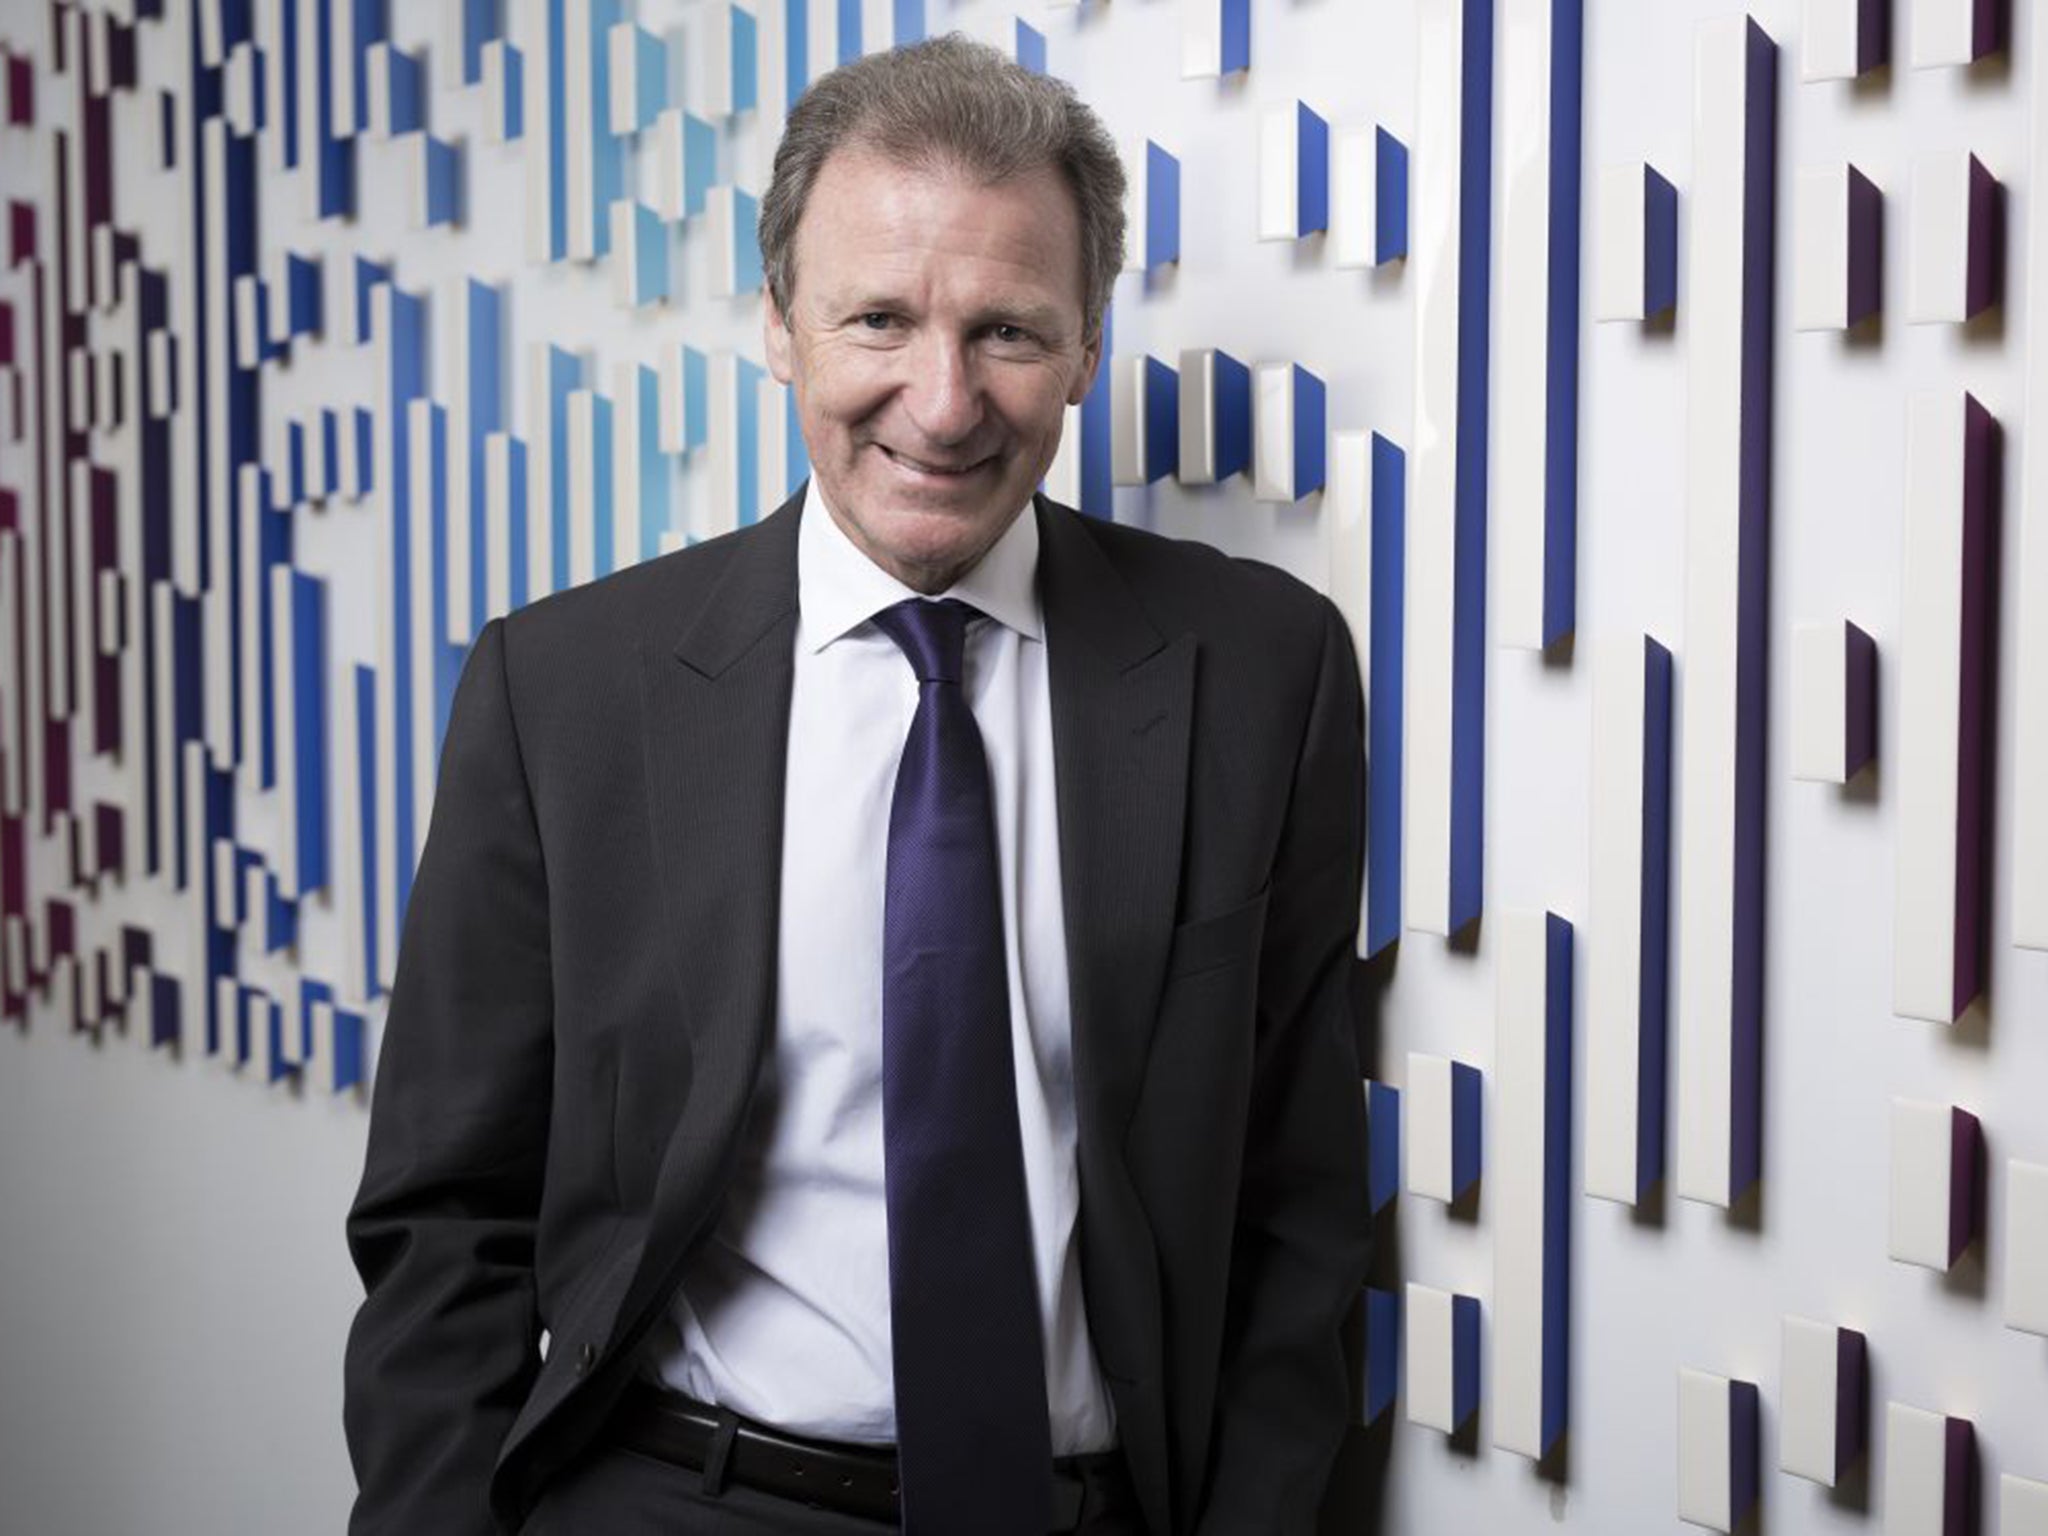 Lord O’Donnell at the offices of his advisory firm Frontier Economics, which he founded after stepping down as Cabinet Secretary